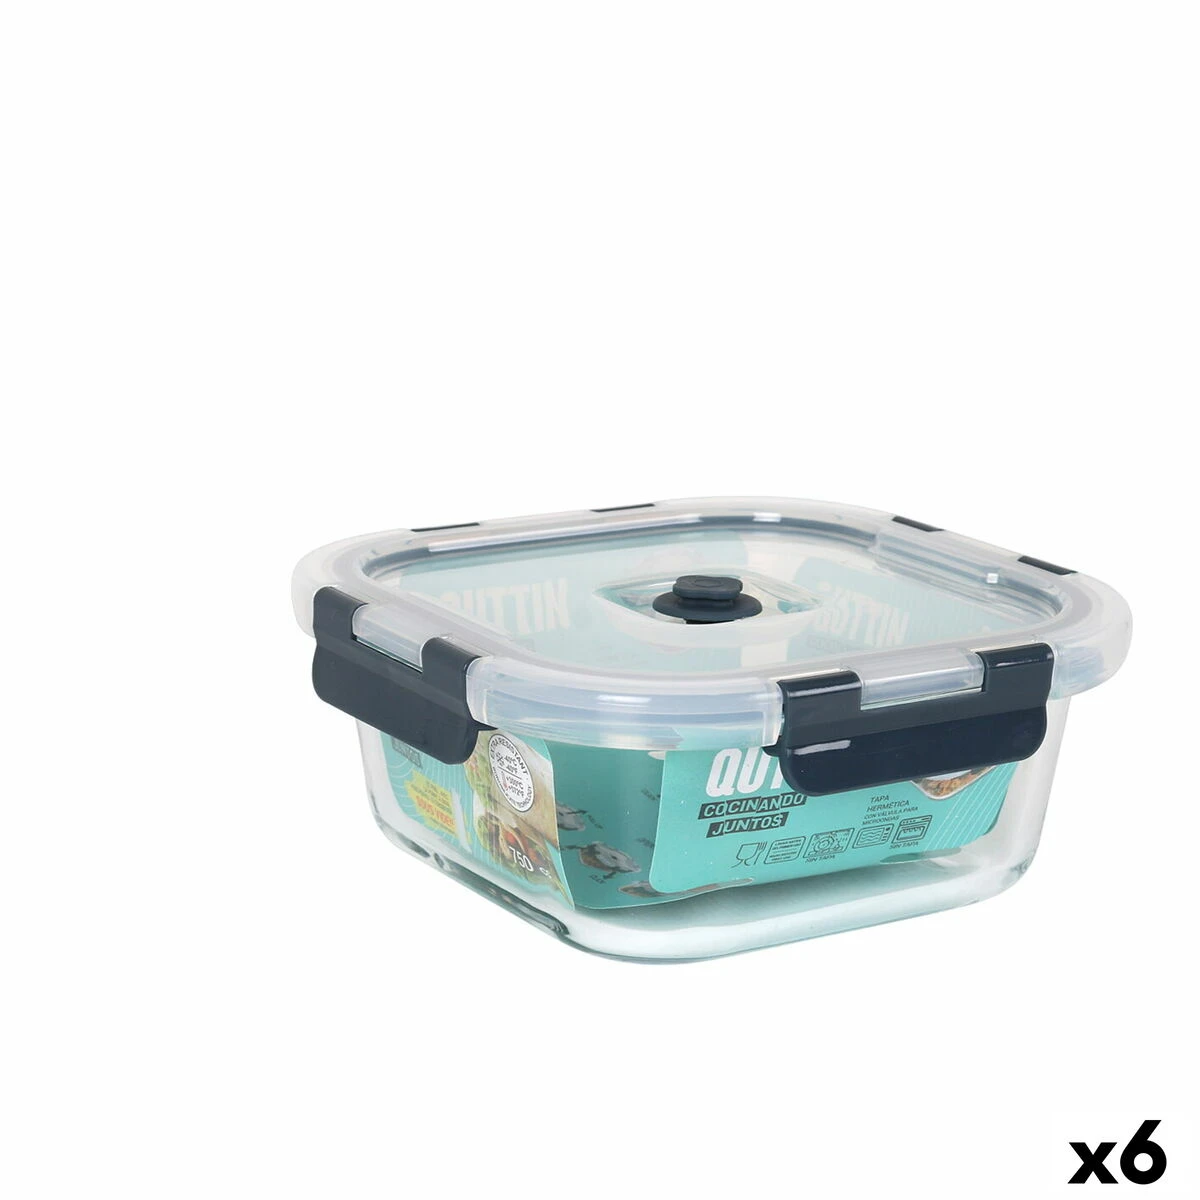 Transparent airtight container with grey lid